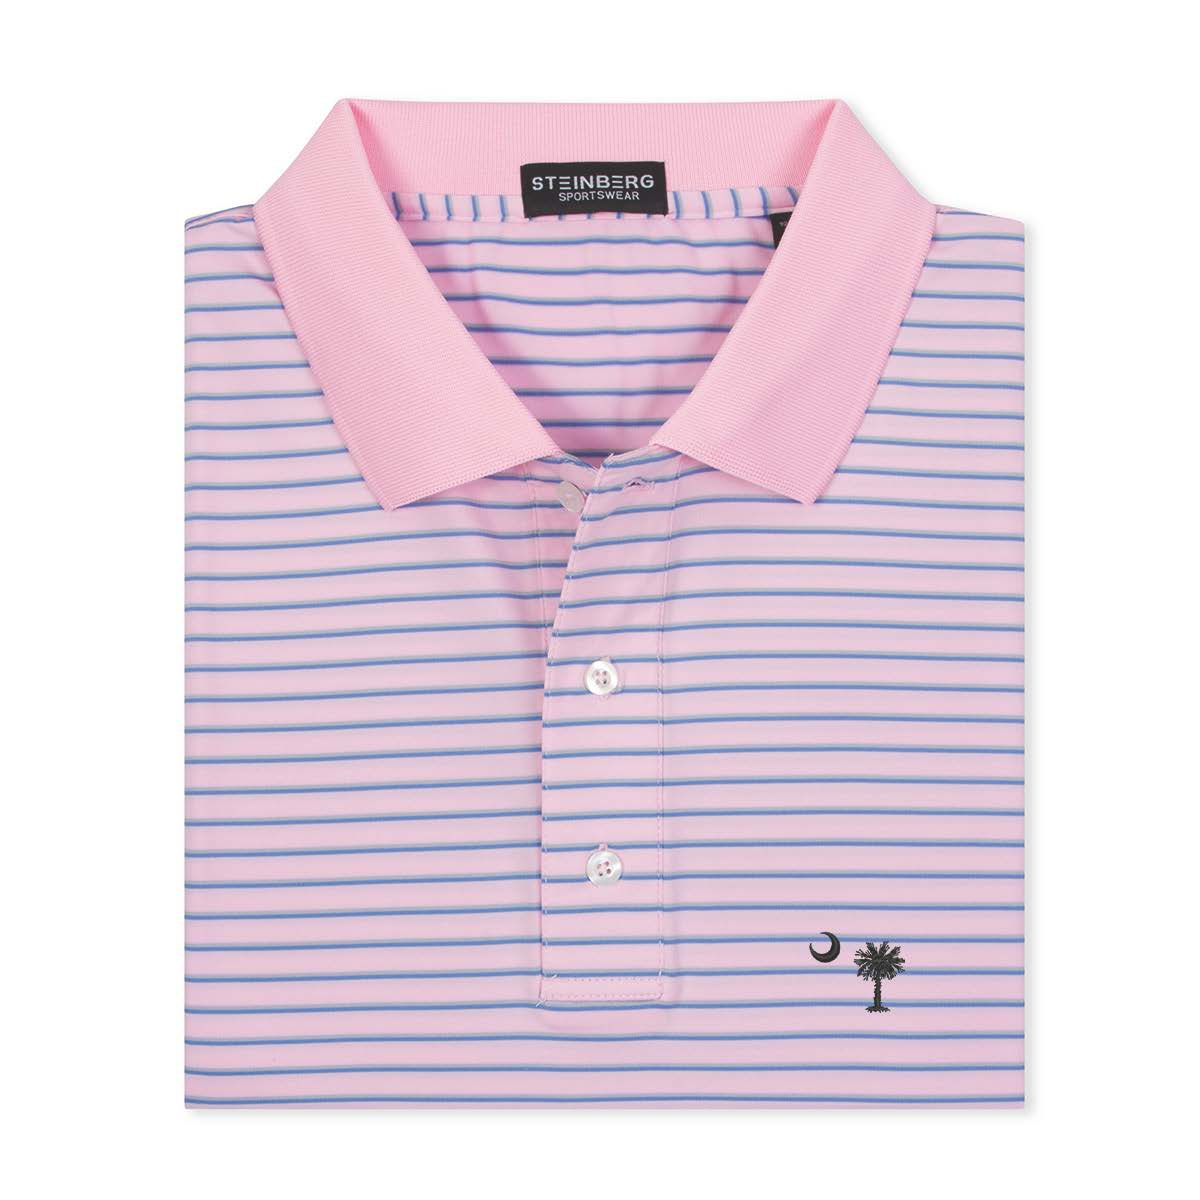 The Victory Lap Performance Polo the Palmetto Moon Collection